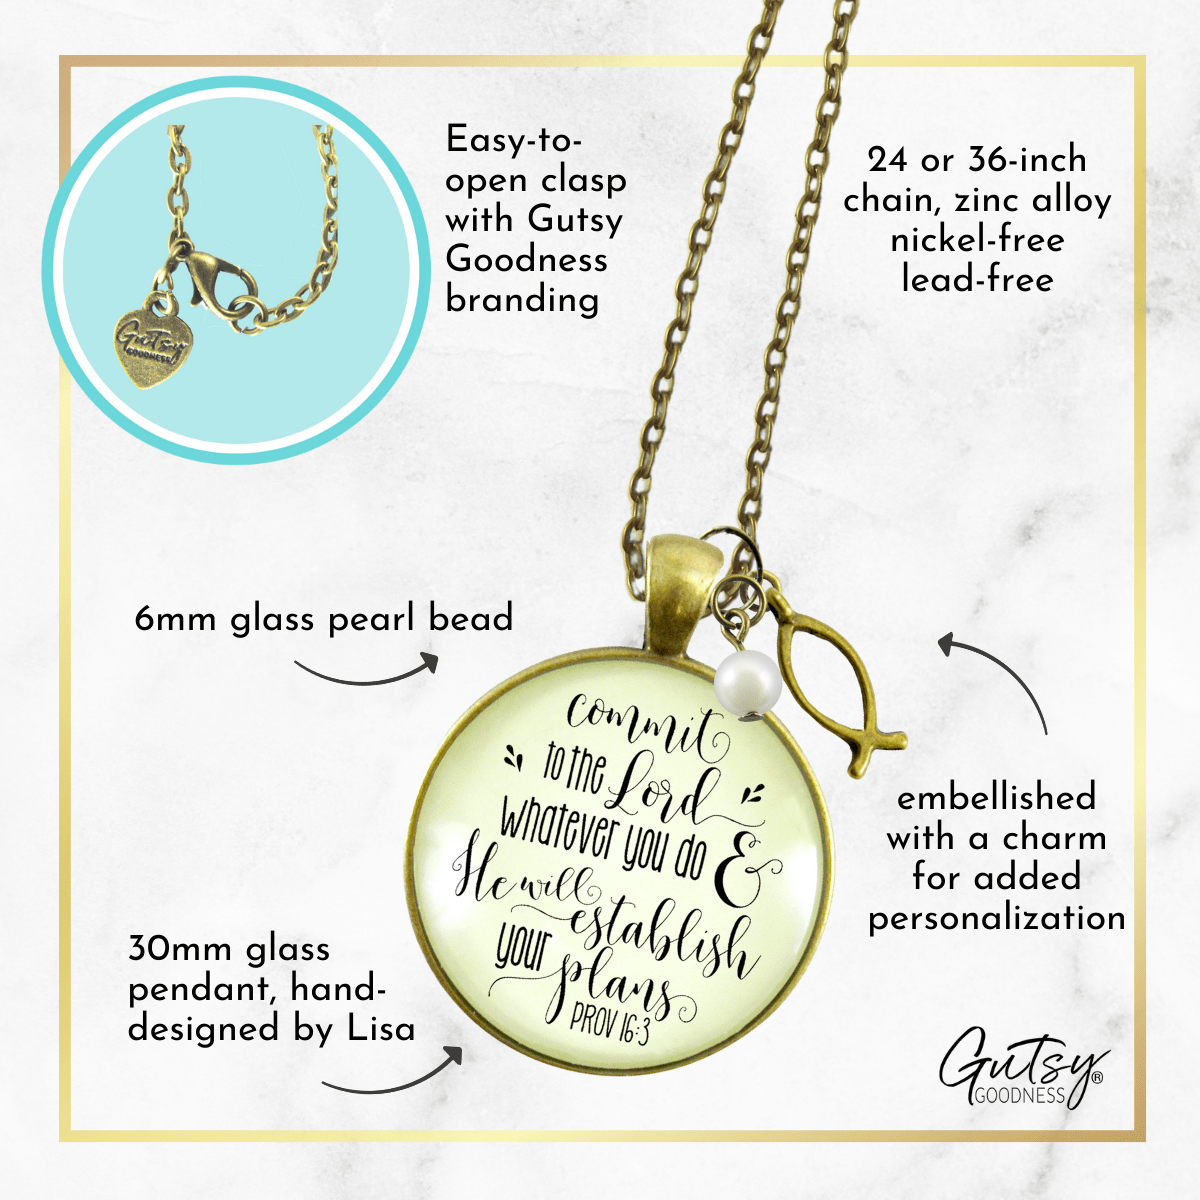 Gutsy Goodness Jesus Fish Necklace Commit to the Lord Proverbs Jewelry Ichthys Charm - Gutsy Goodness Handmade Jewelry;Jesus Fish Necklace Commit To The Lord Proverbs Jewelry Ichthys Charm - Gutsy Goodness Handmade Jewelry Gifts